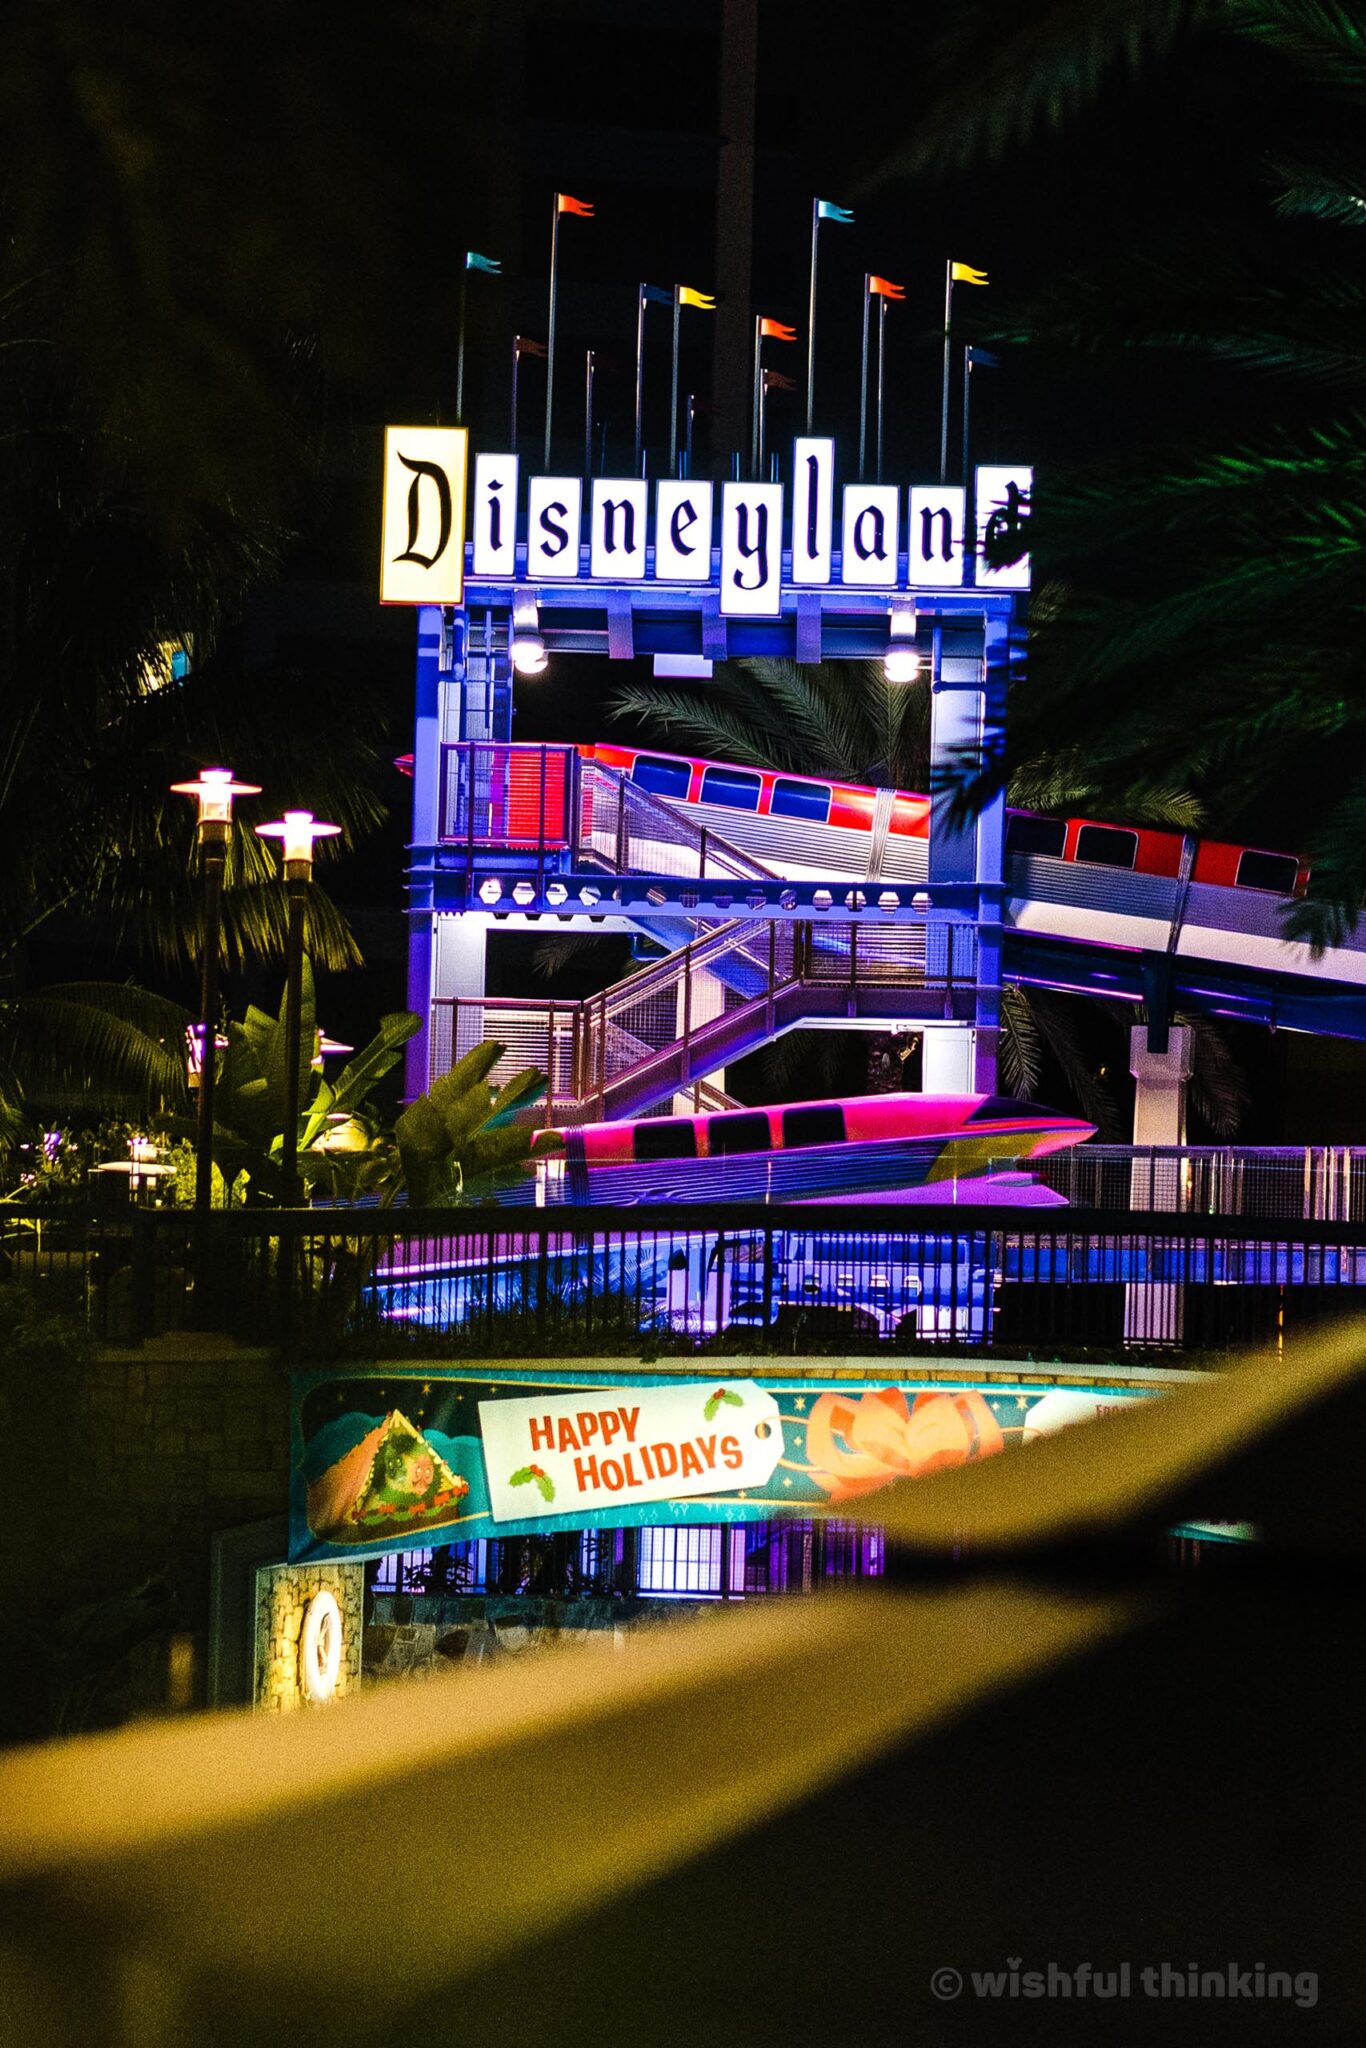 Disneyland Hotel's famous vintage monorail waterslide sign glows at night in Anaheim, California